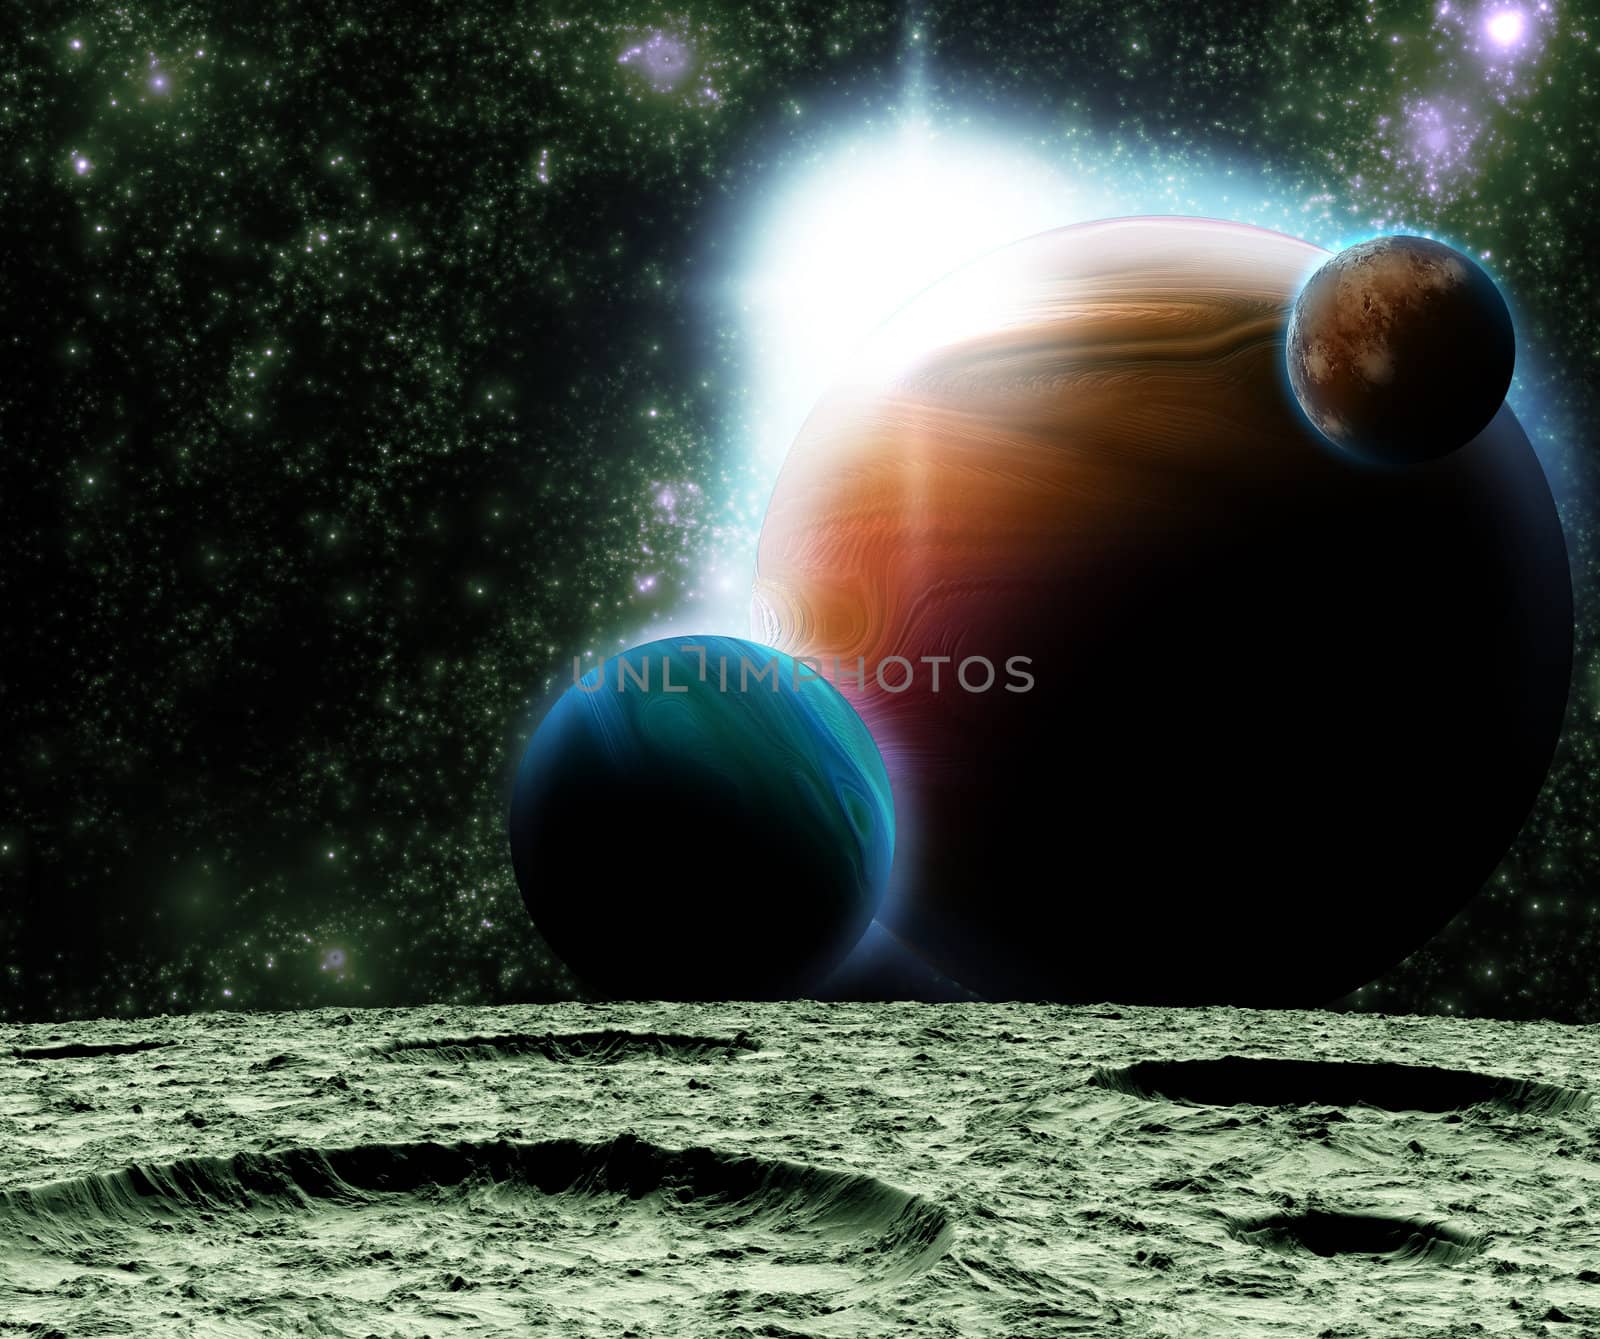 View of the Universe from the moon's surface. Abstract illustration of distant regions.